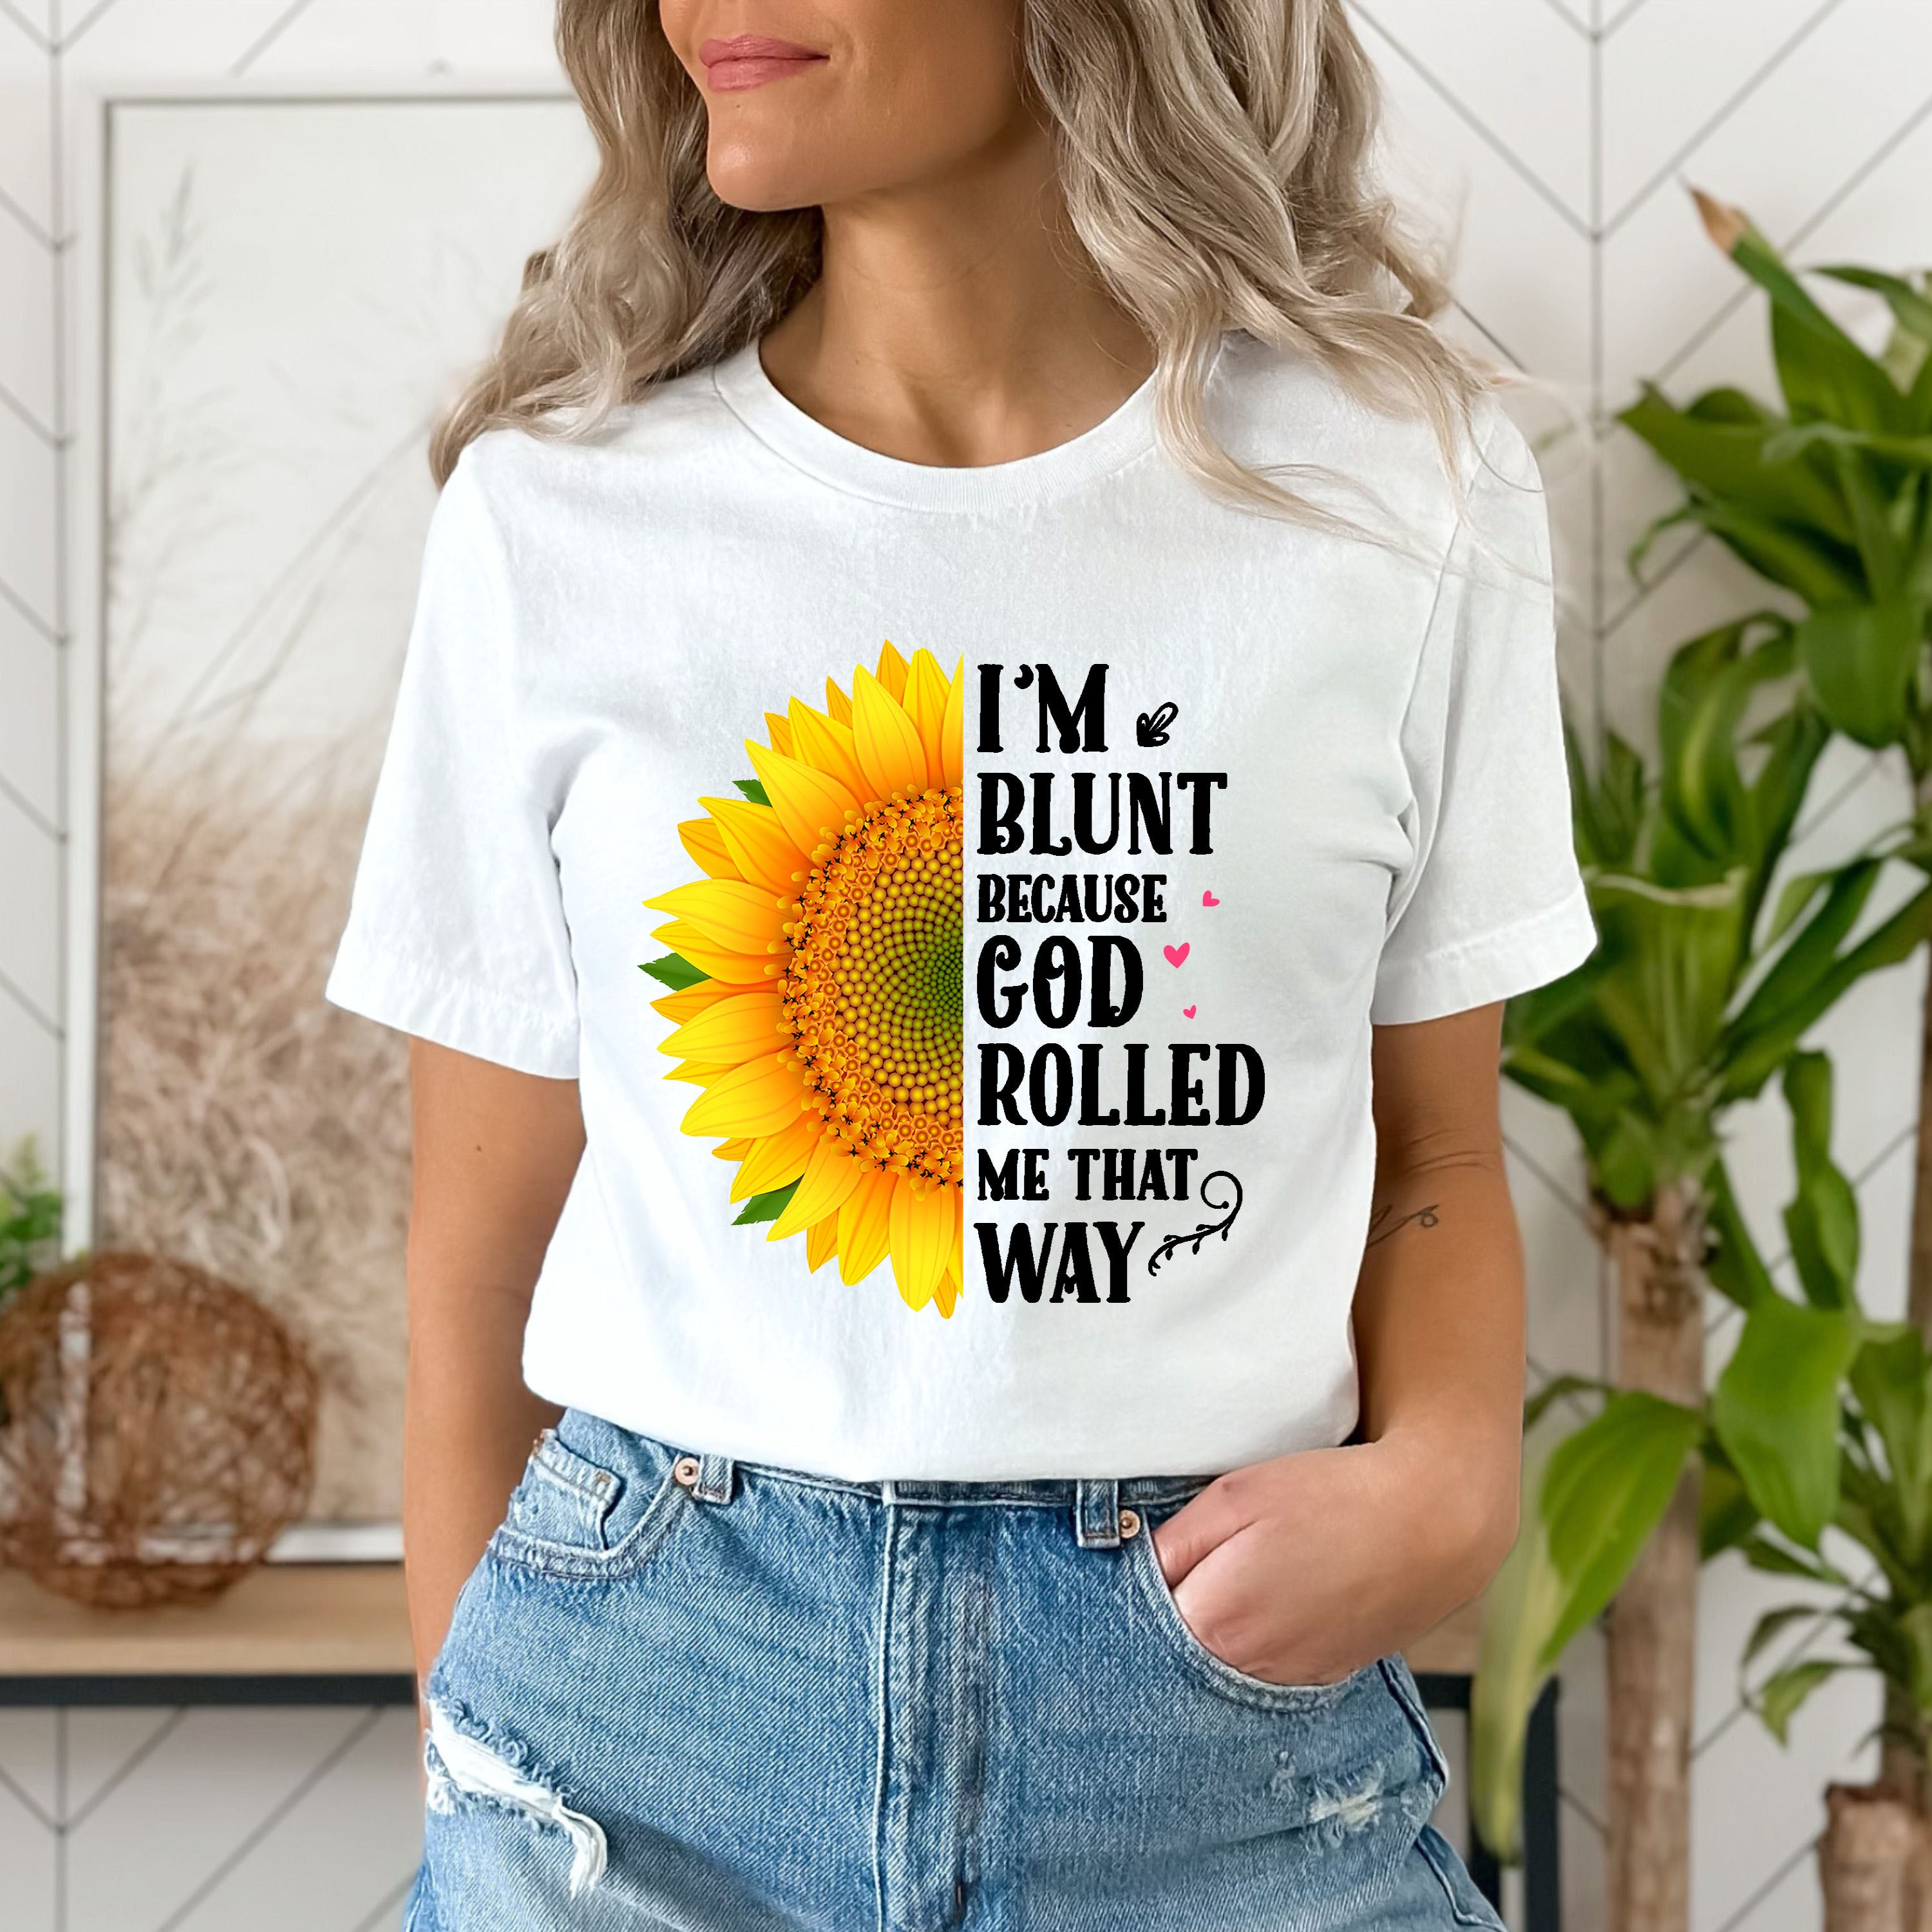 "I'M BLUNT BECAUSE GOD ROLLED ME THAT WAY'' UNISEX TEE